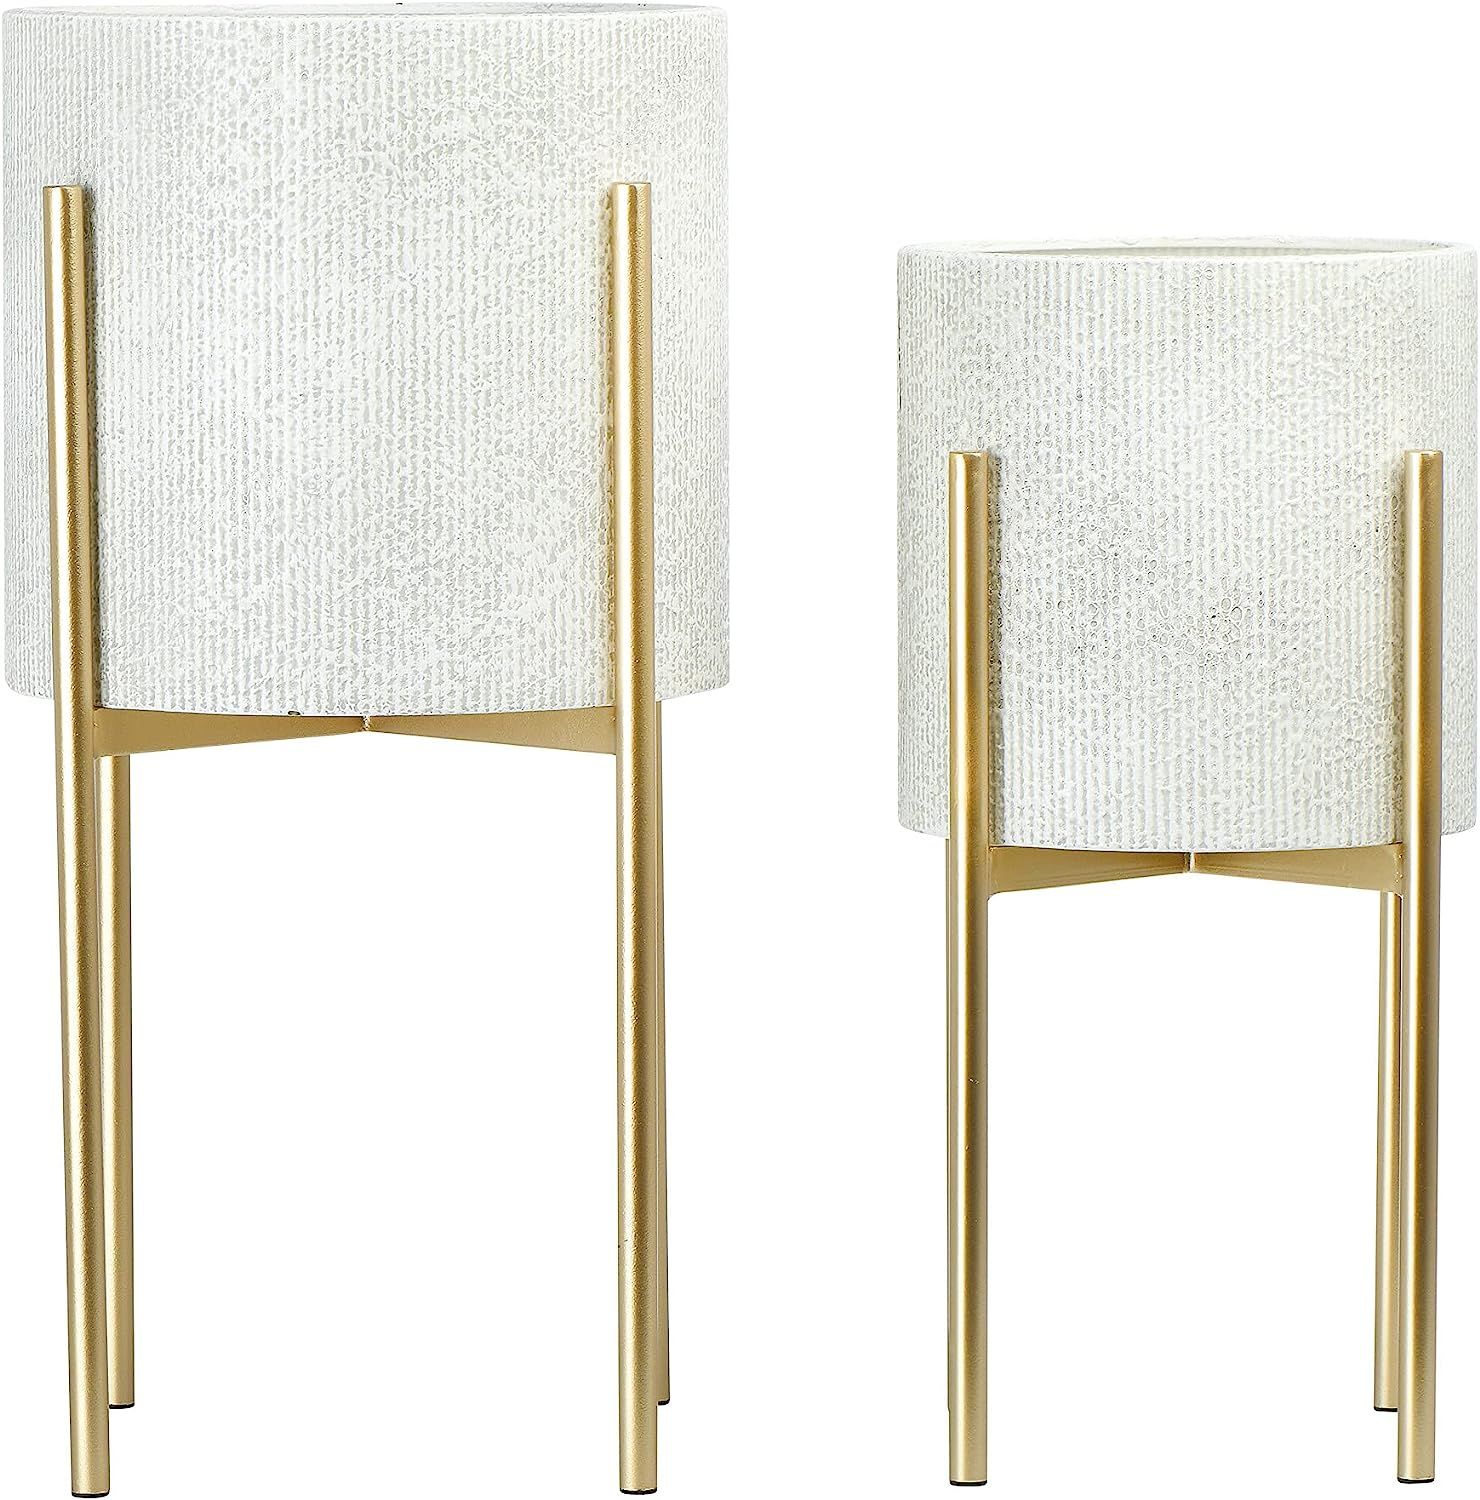 Main + Mesa Modern Boho Embossed Metal Planters with Stands, White and Gold, Set of 2 Sizes | Amazon (US)